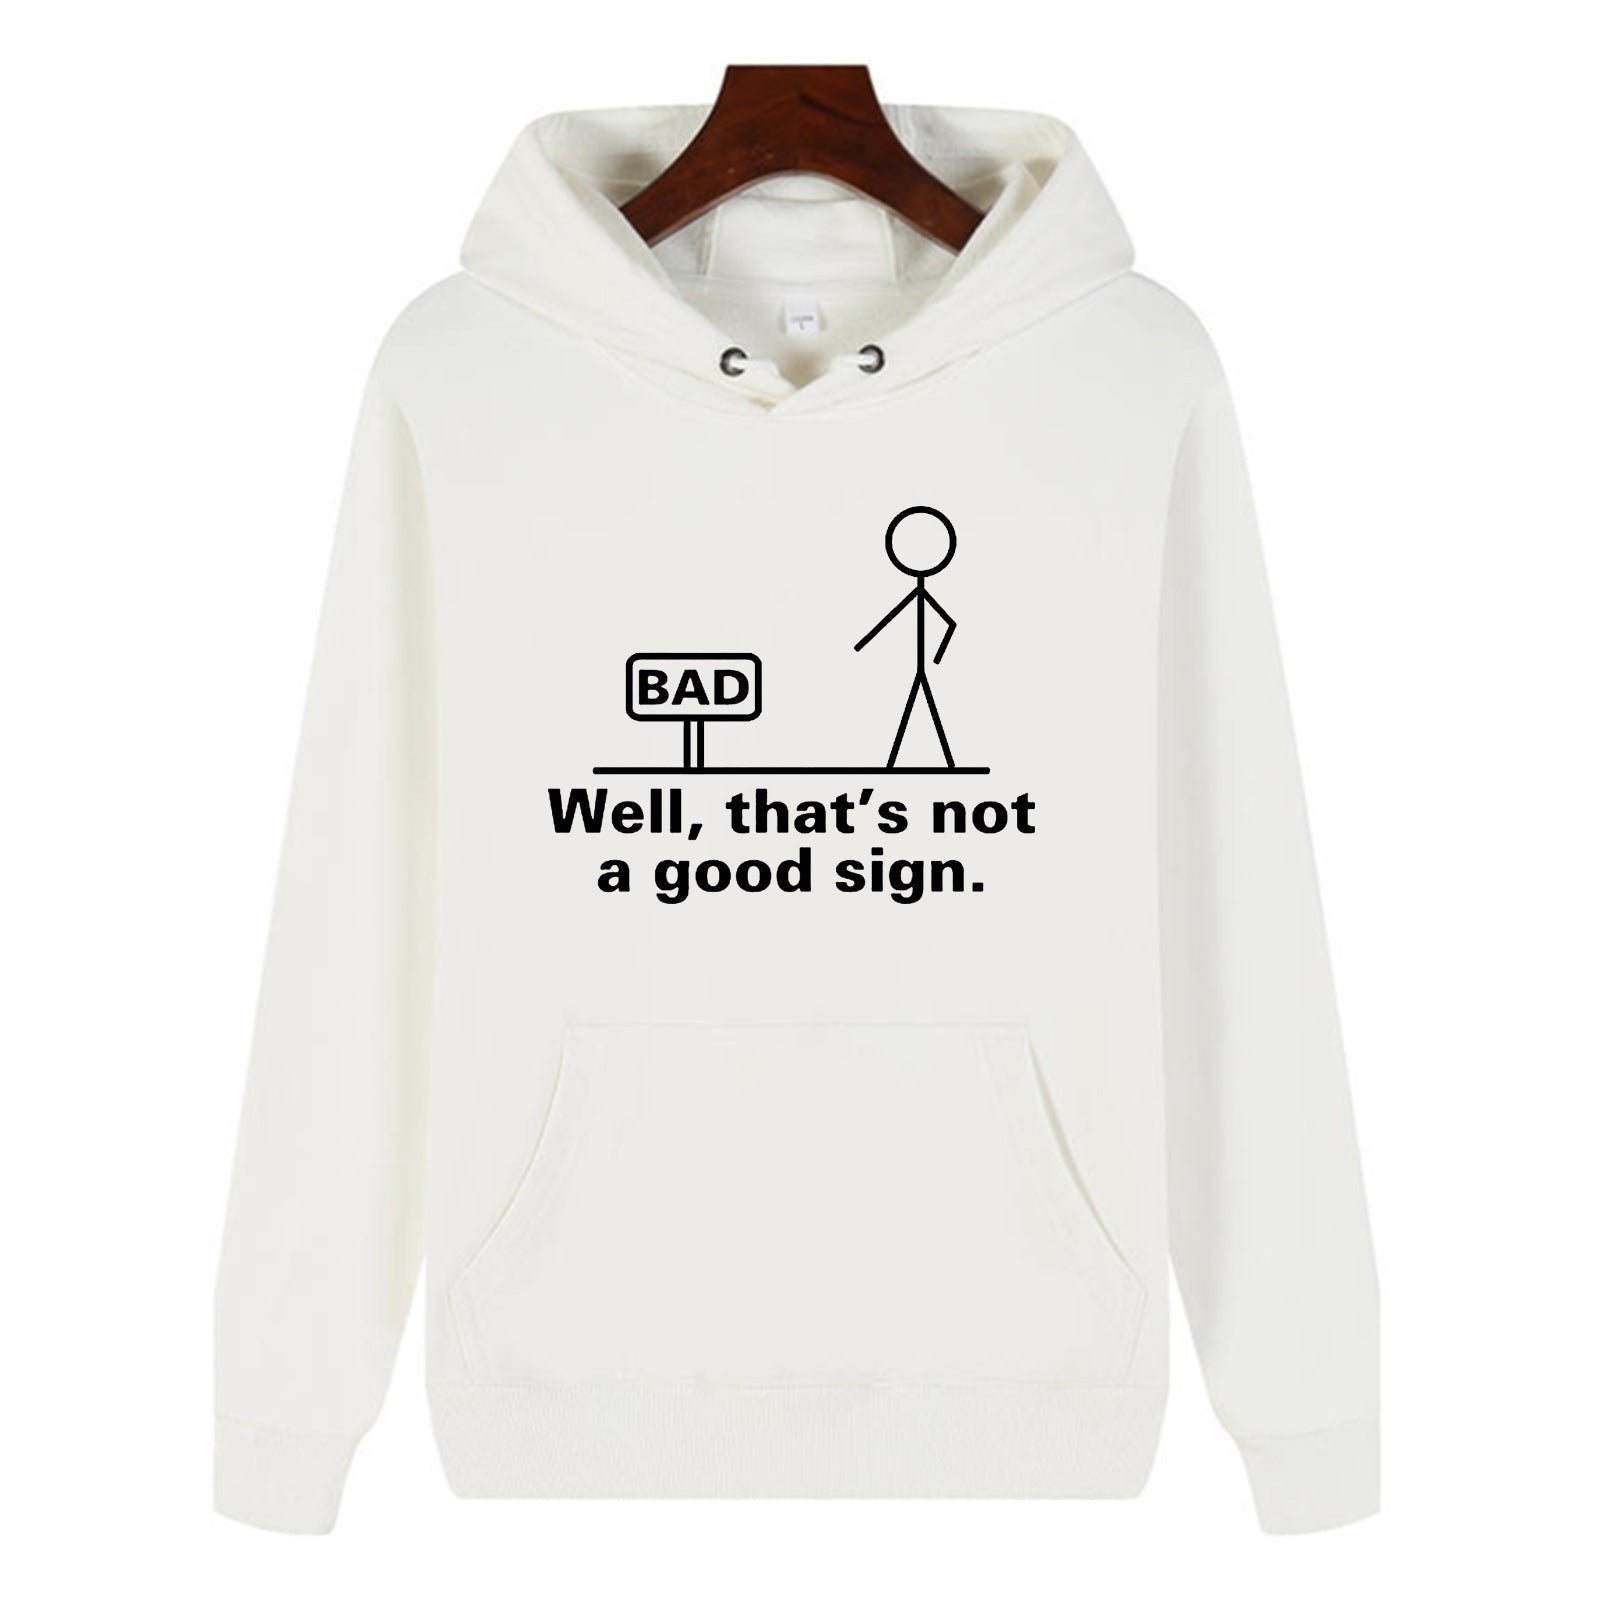 Funny Humor Print Hoodie Well,that's not a good sign Hooded Sweatshirt